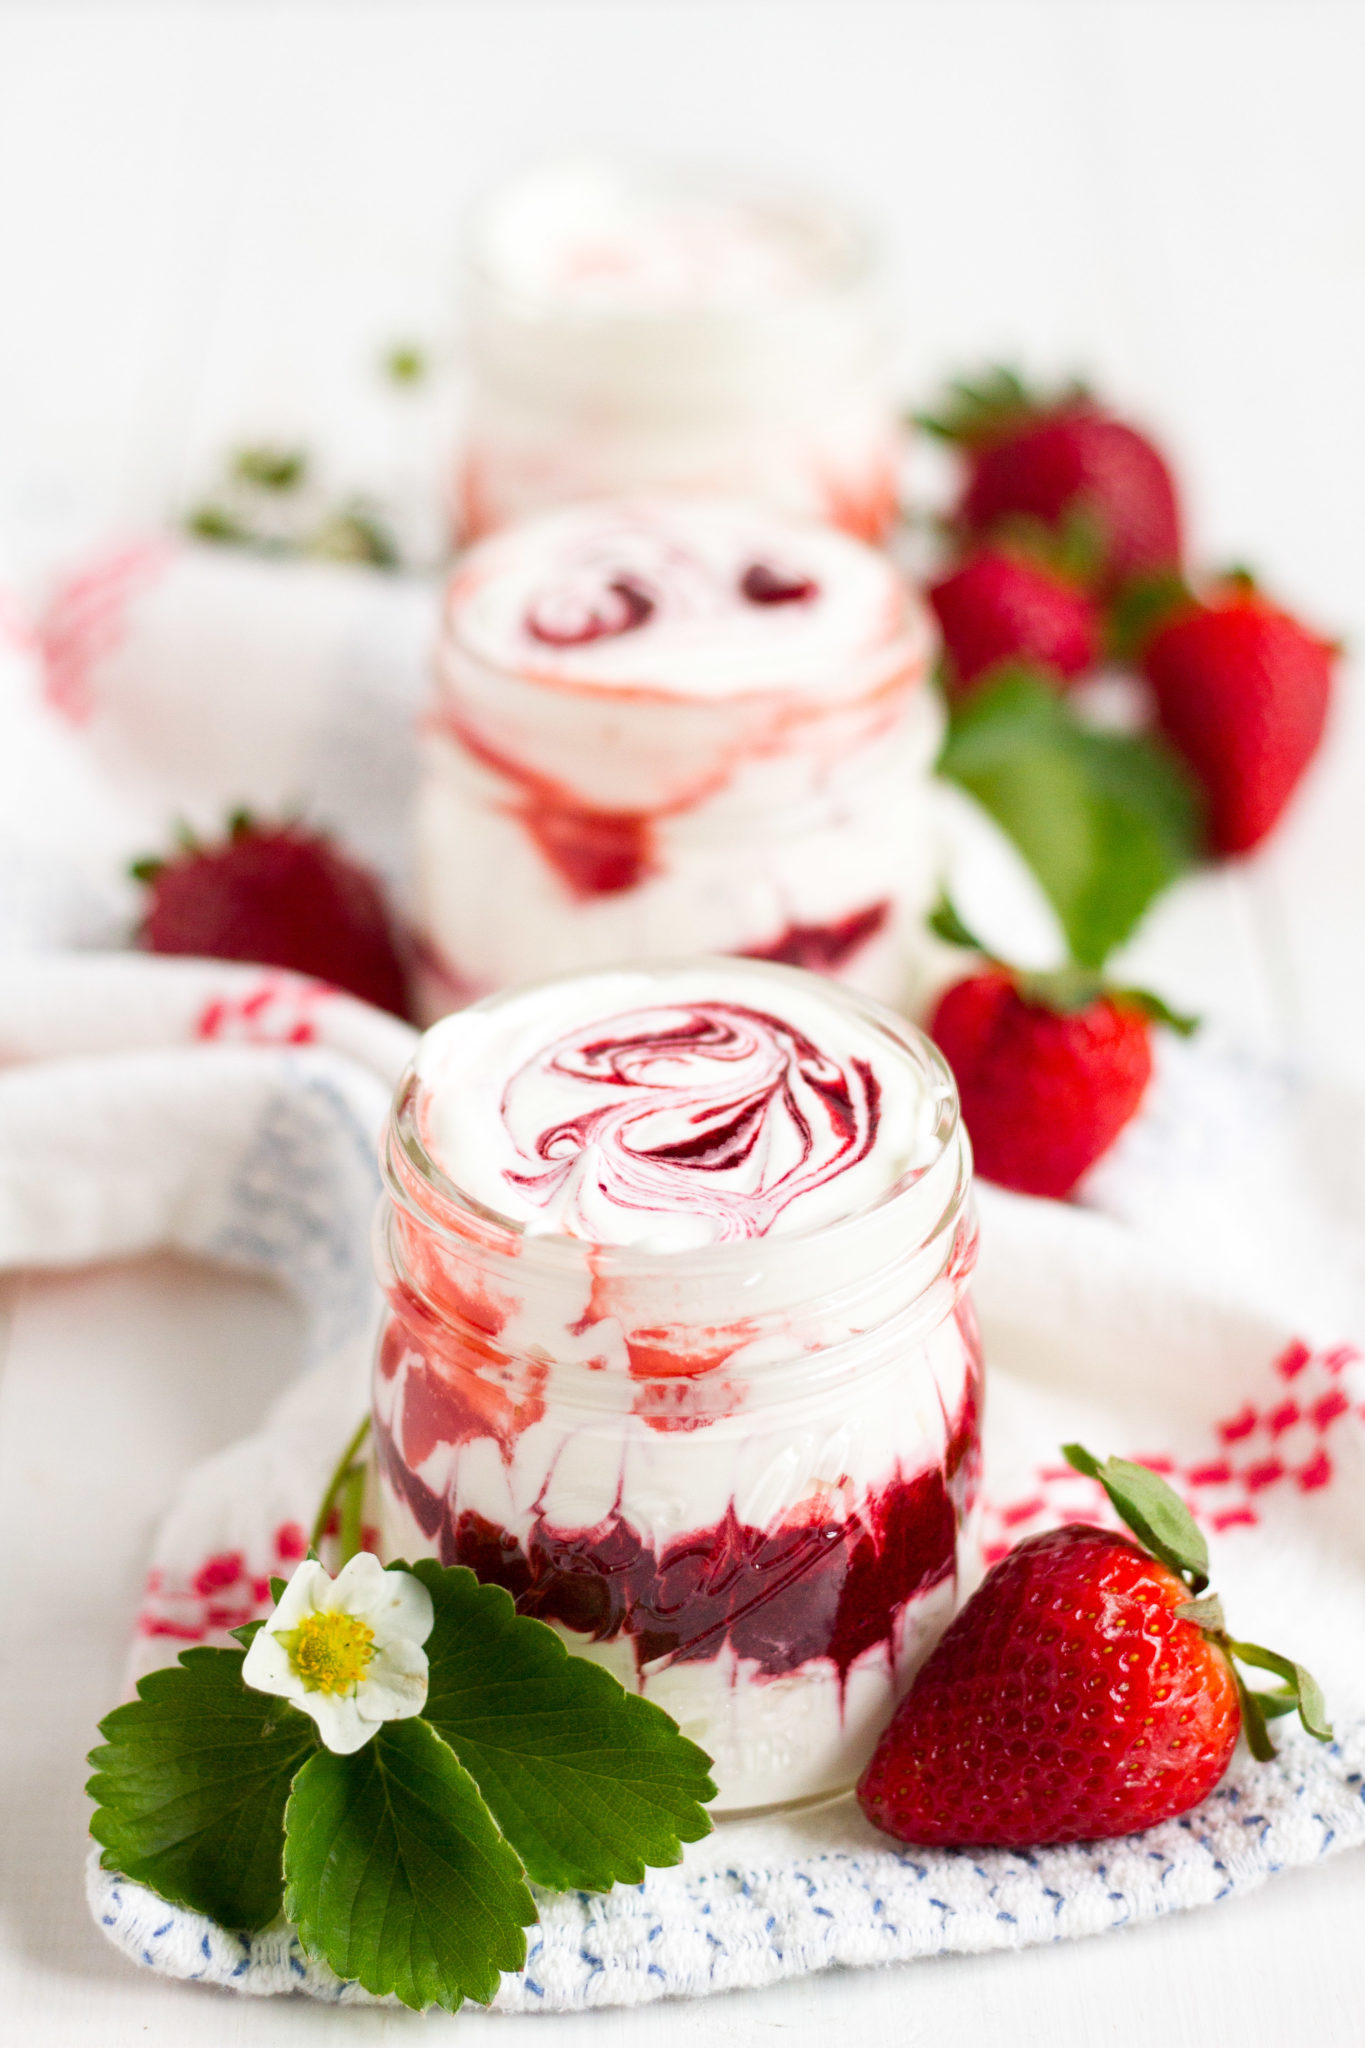 Summer Berry Fool is an easy, beautiful, and delicious dessert with just 6 ingredients.